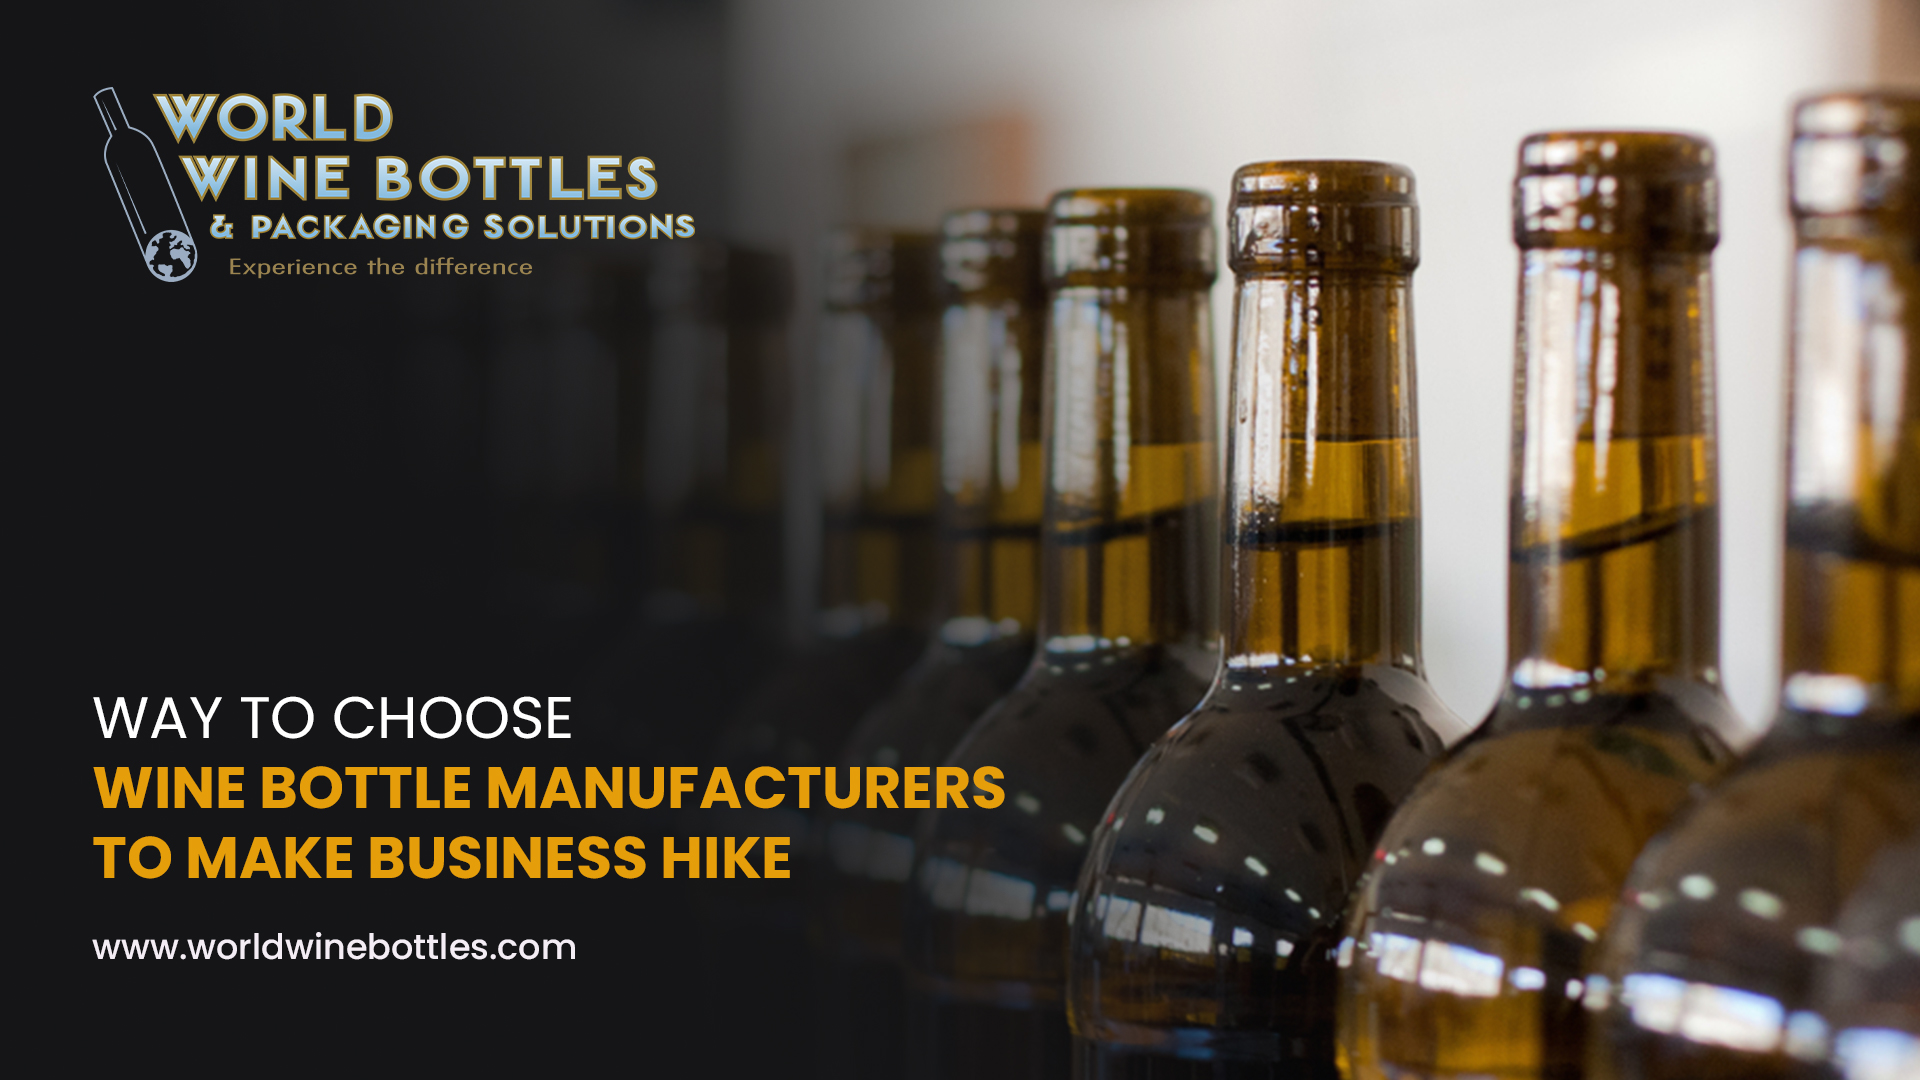 Way to Choose Wine Bottle Manufacturers to Make Business Hike